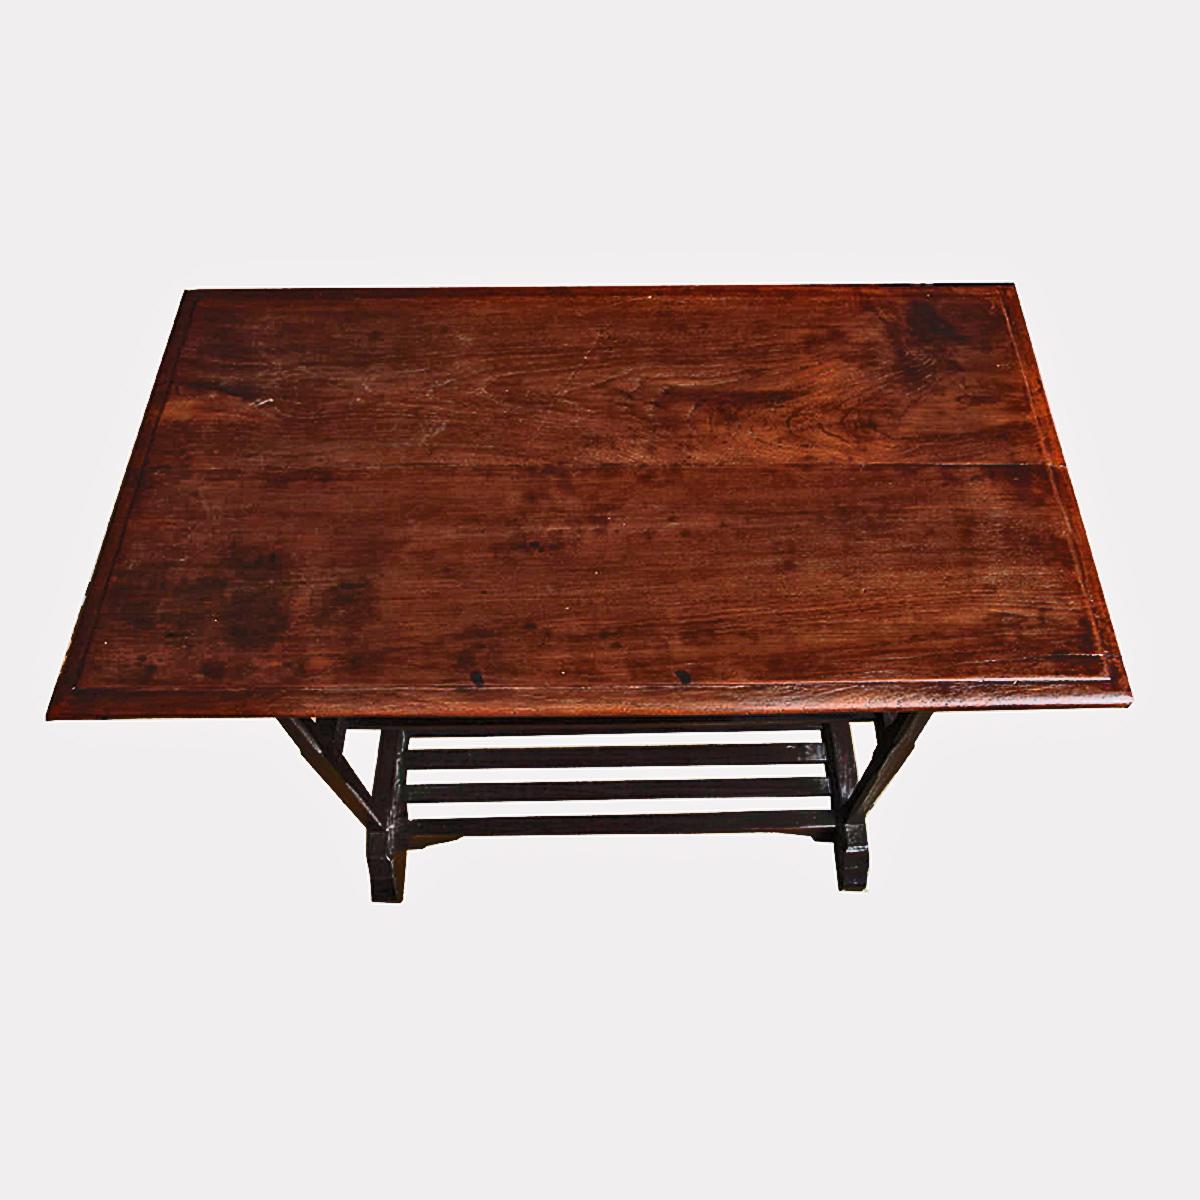 A table with two lower shelves from Thailand. Finished in two types of wood, this versatile table offers many possibilities as a utility table for a kitchen, a bedroom or any other room where additional storage is needed.